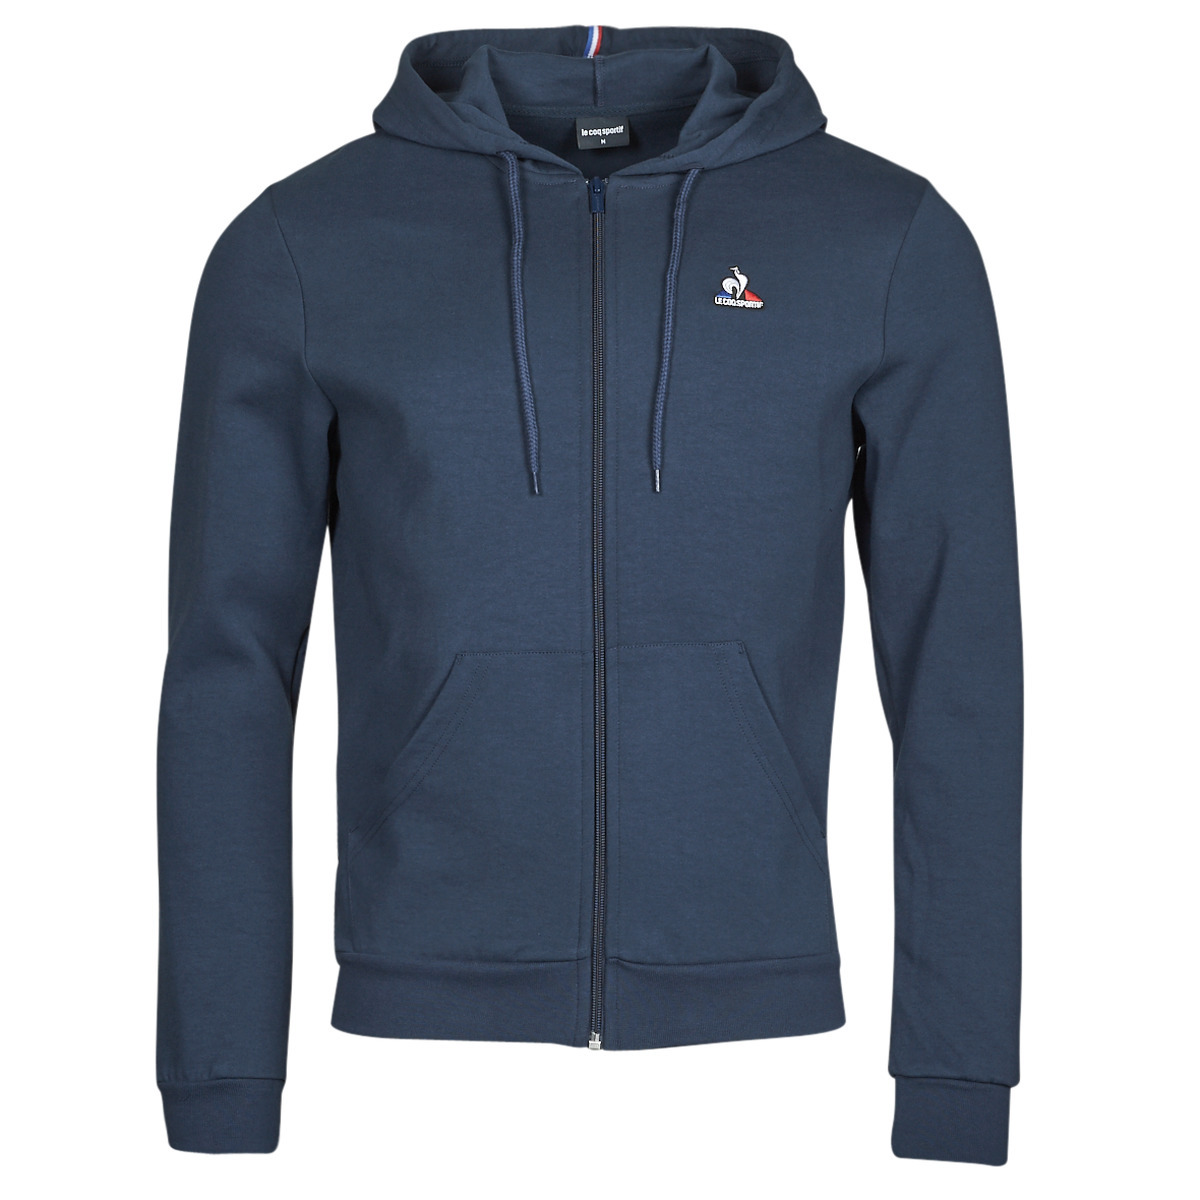 Le Coq Sportif Gents Training Jacket Blue from Spartoo GOOFASH